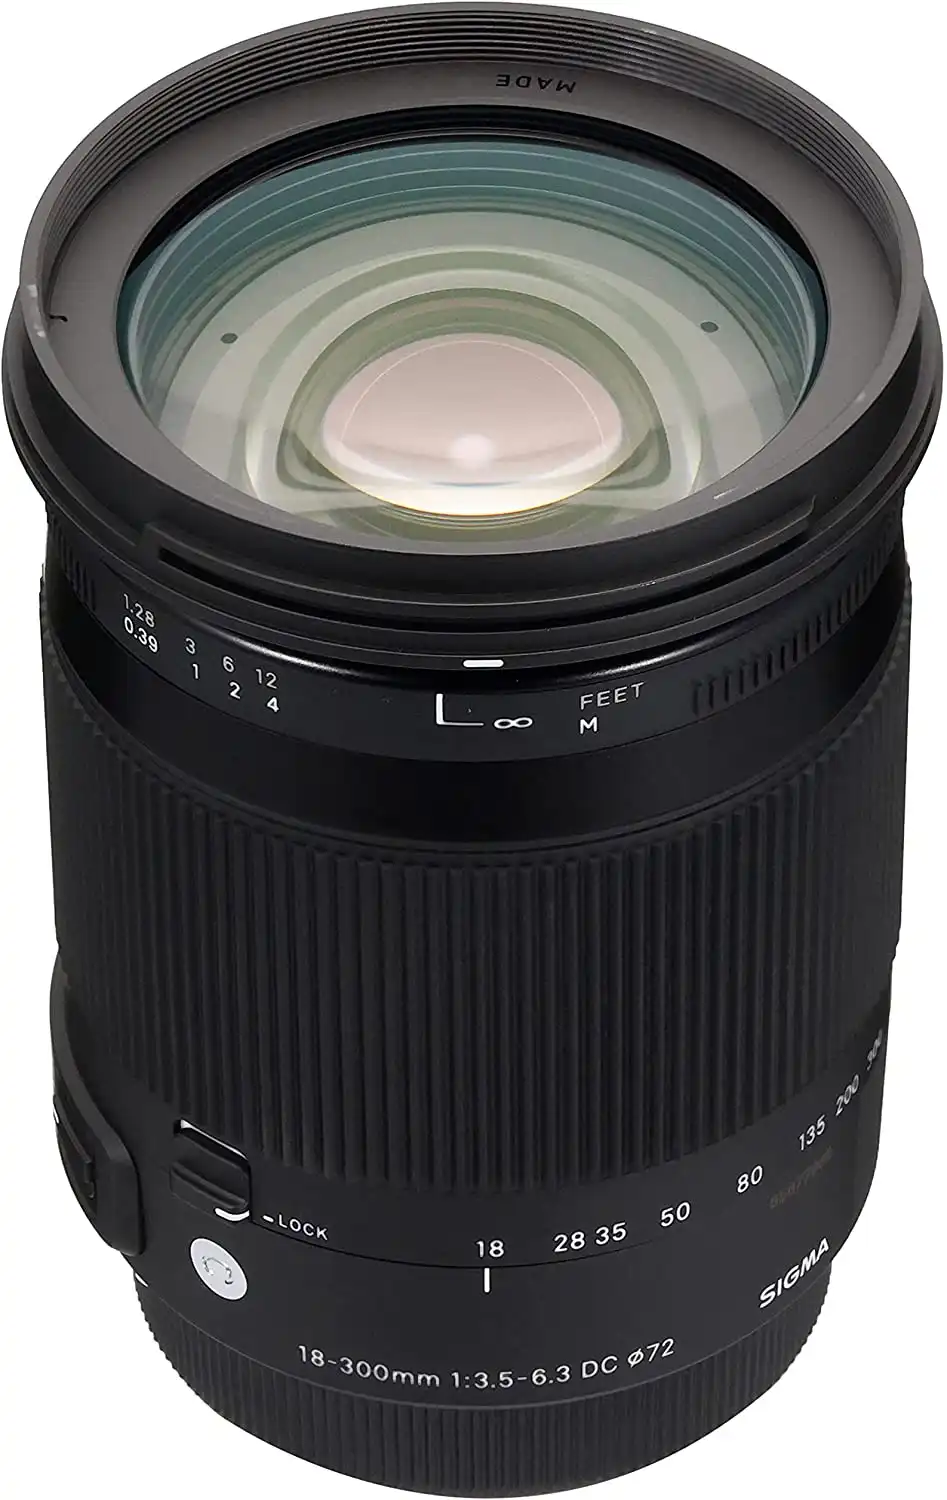 Best Canon Superzoom Lens for Travel Photography 2 image 